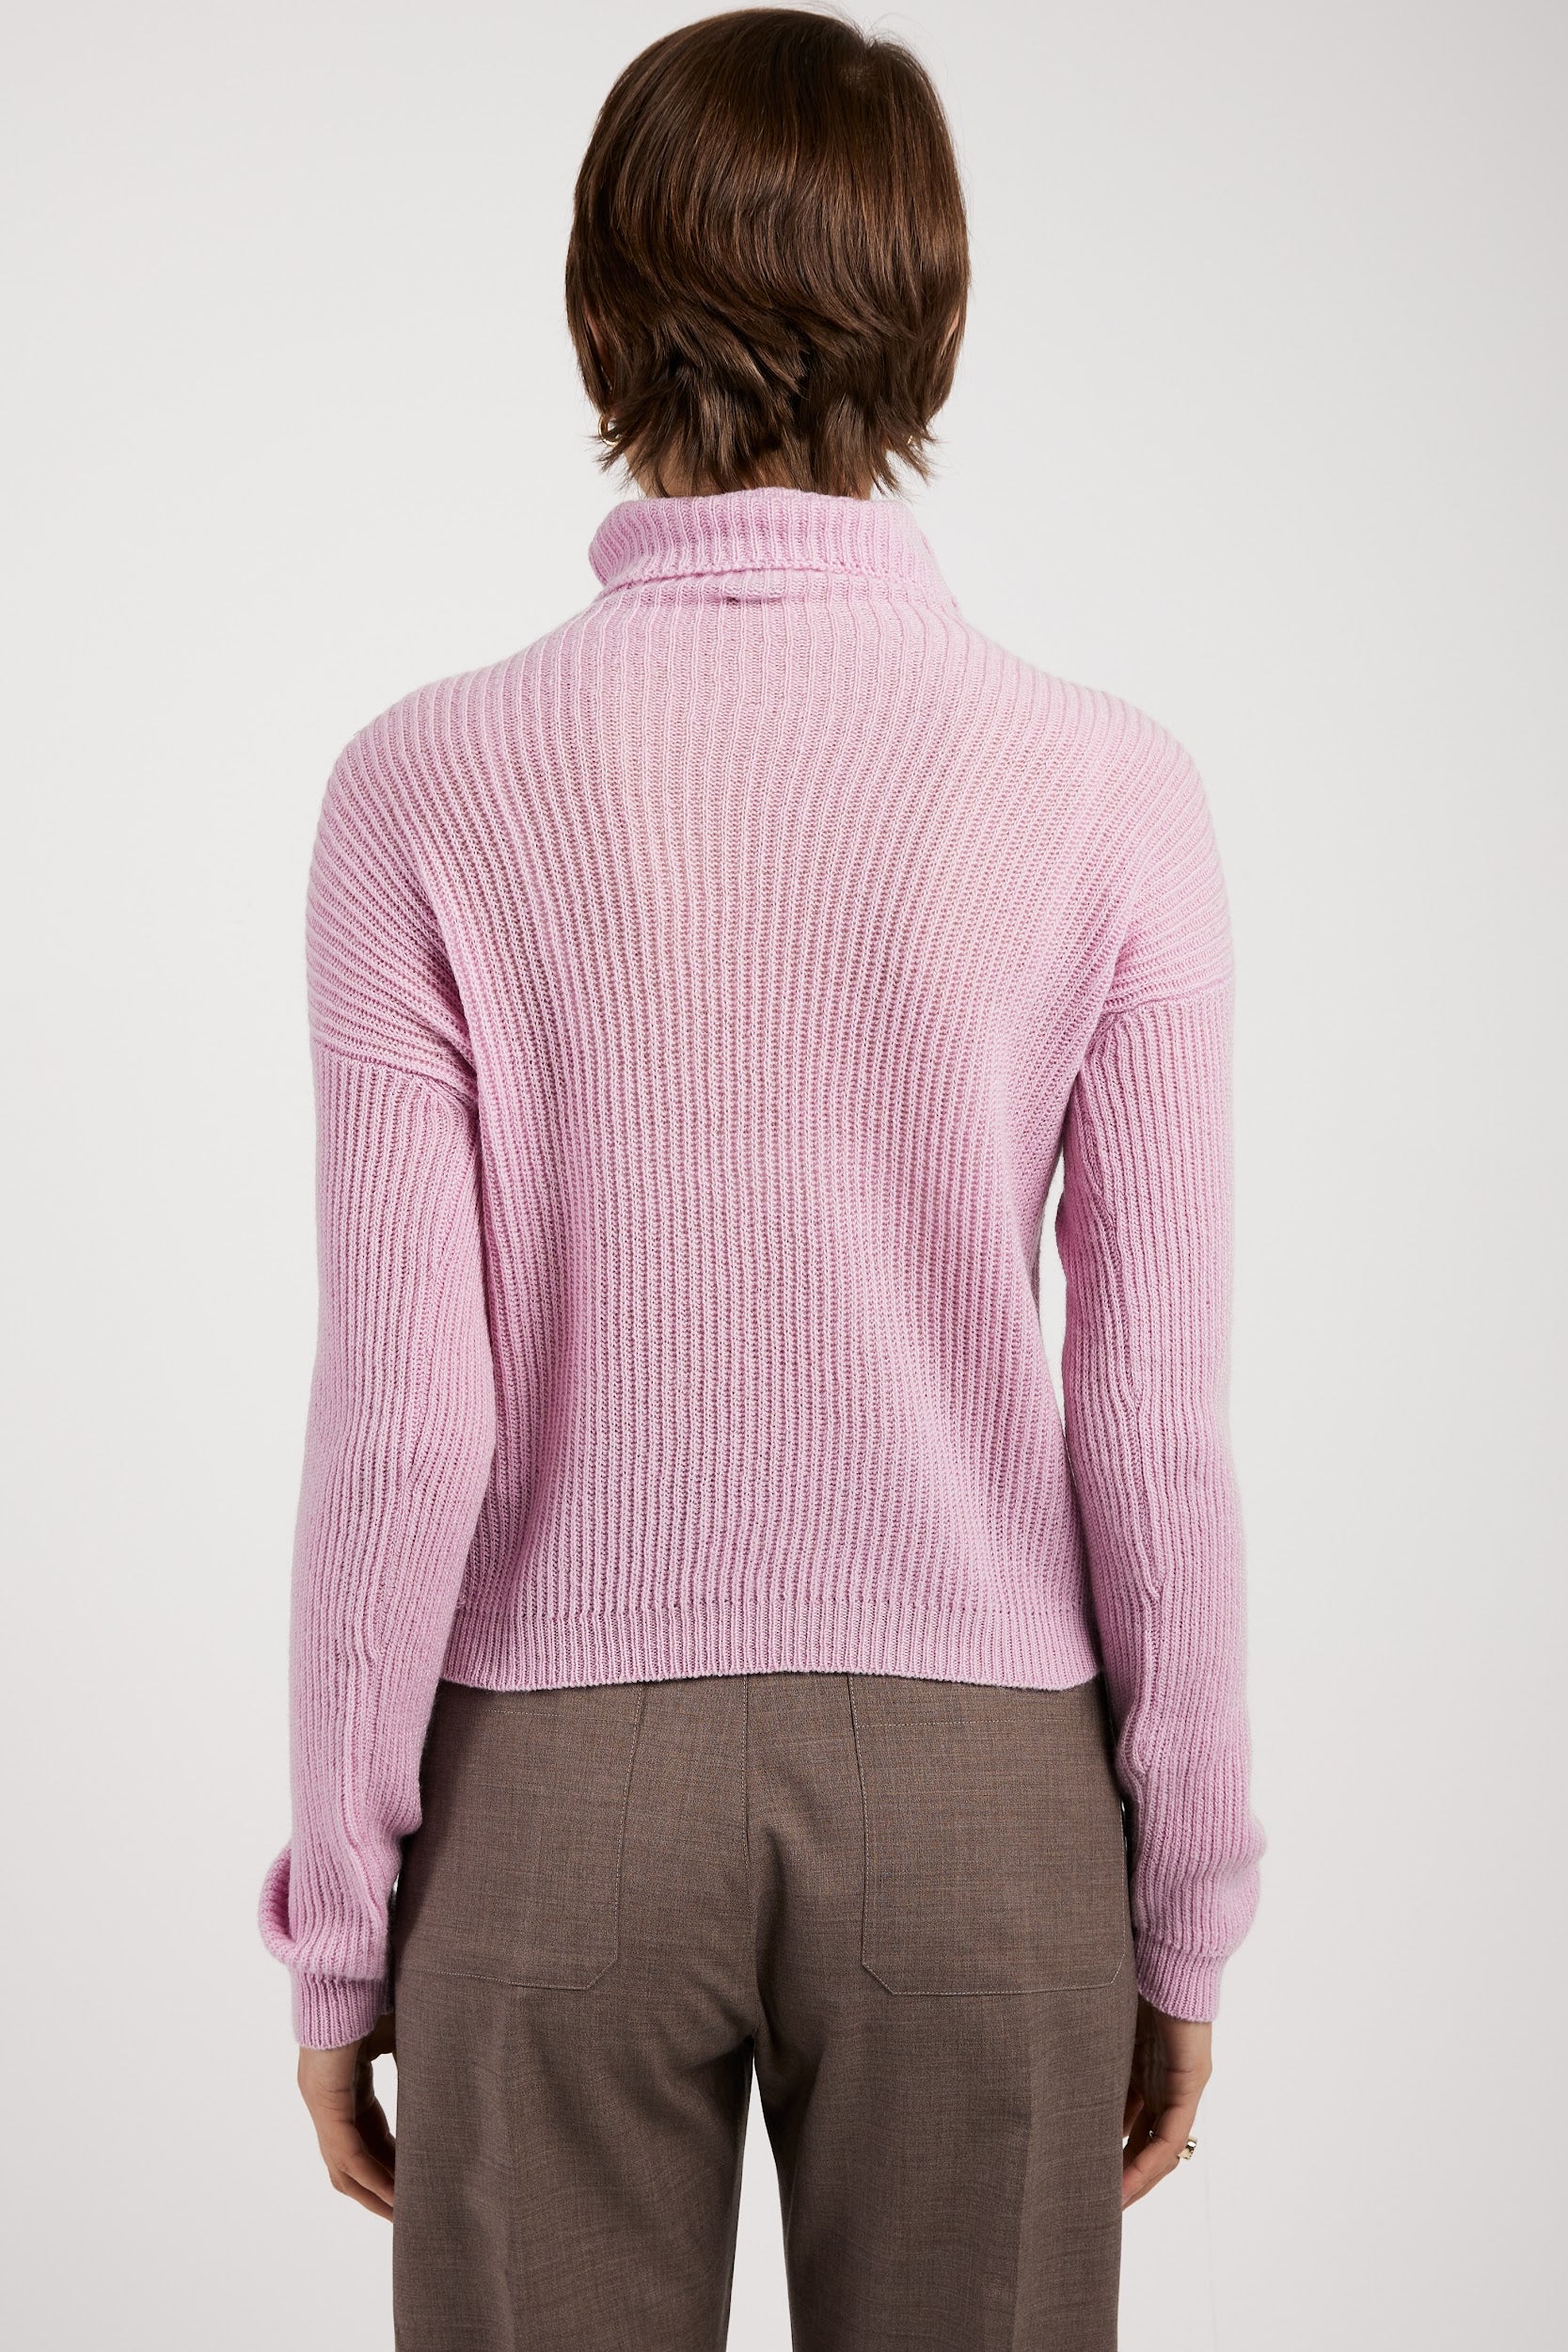 PRIVATE 0204 Light Cashmere Turtleneck Sweater in Rose